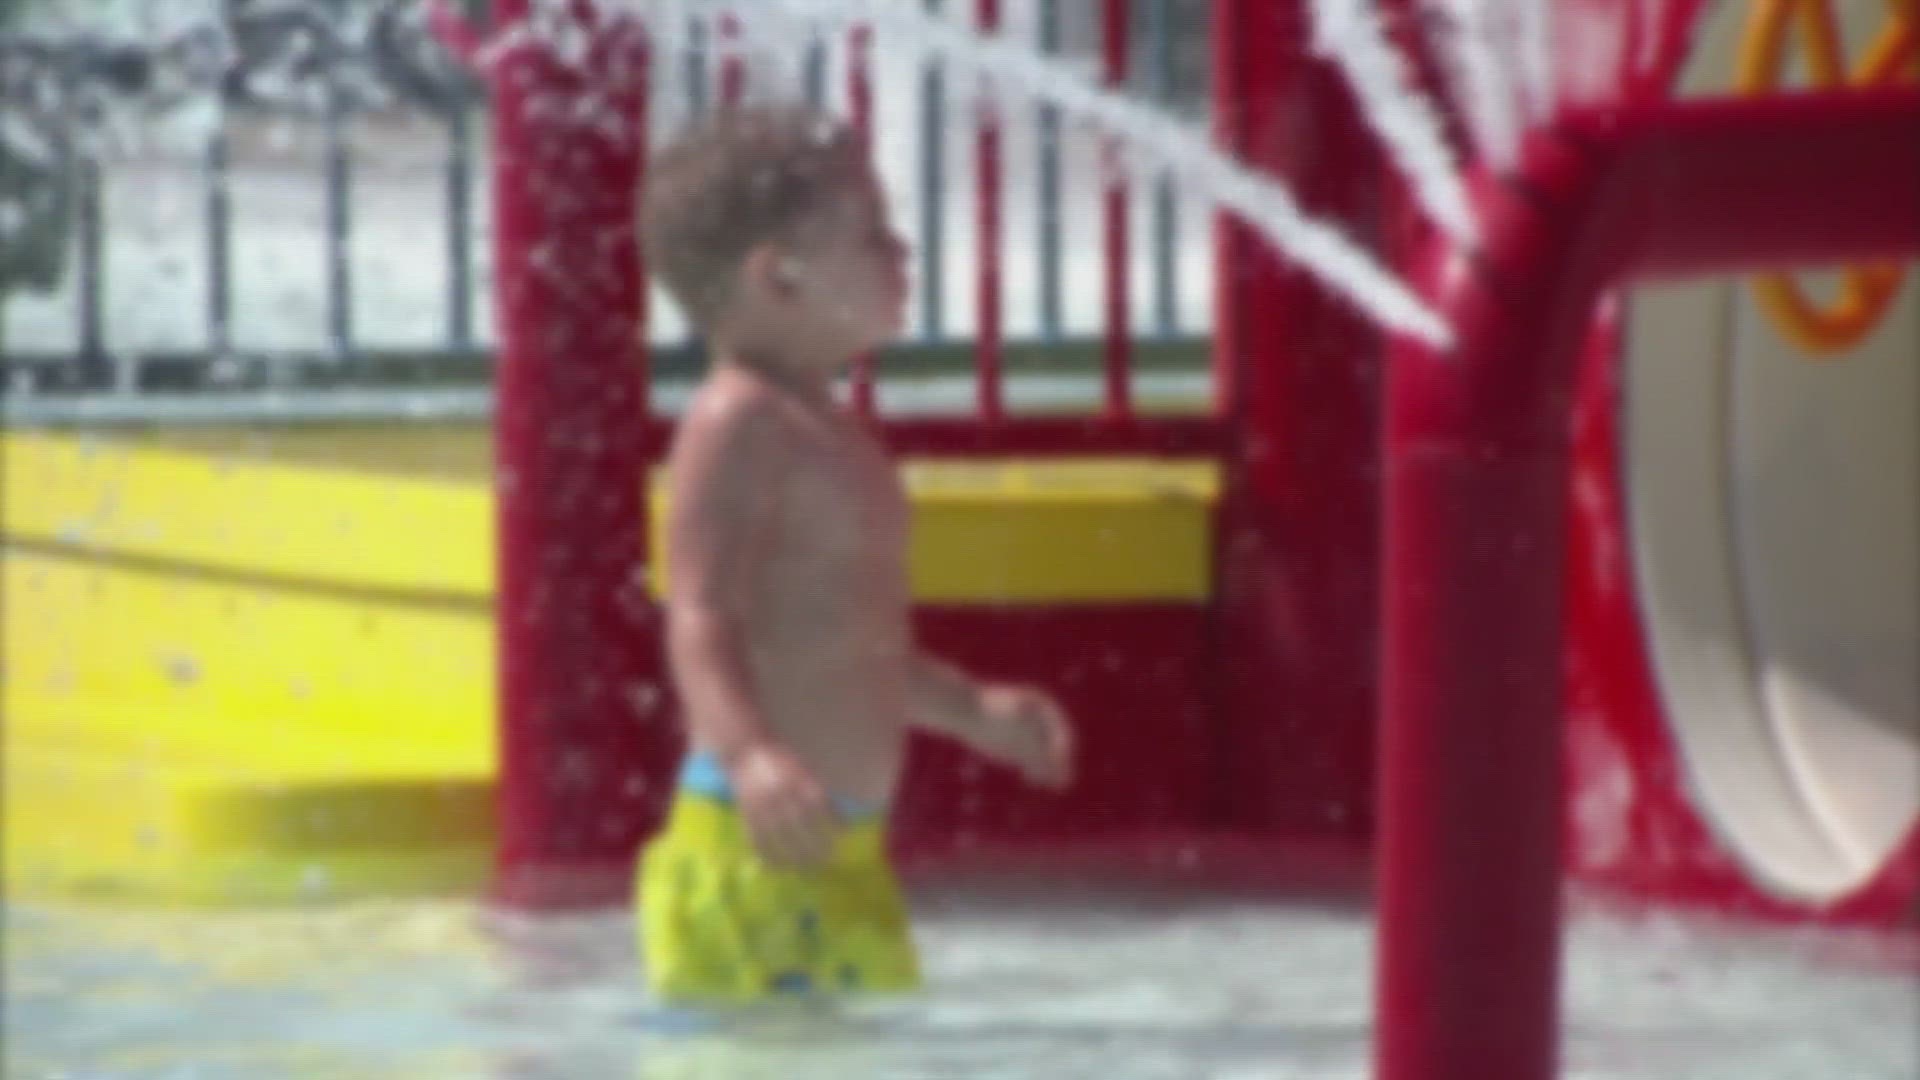 One Indianapolis family is urging people to stay extra cautious after their toddler ended up in the water and nearly drowned last year.